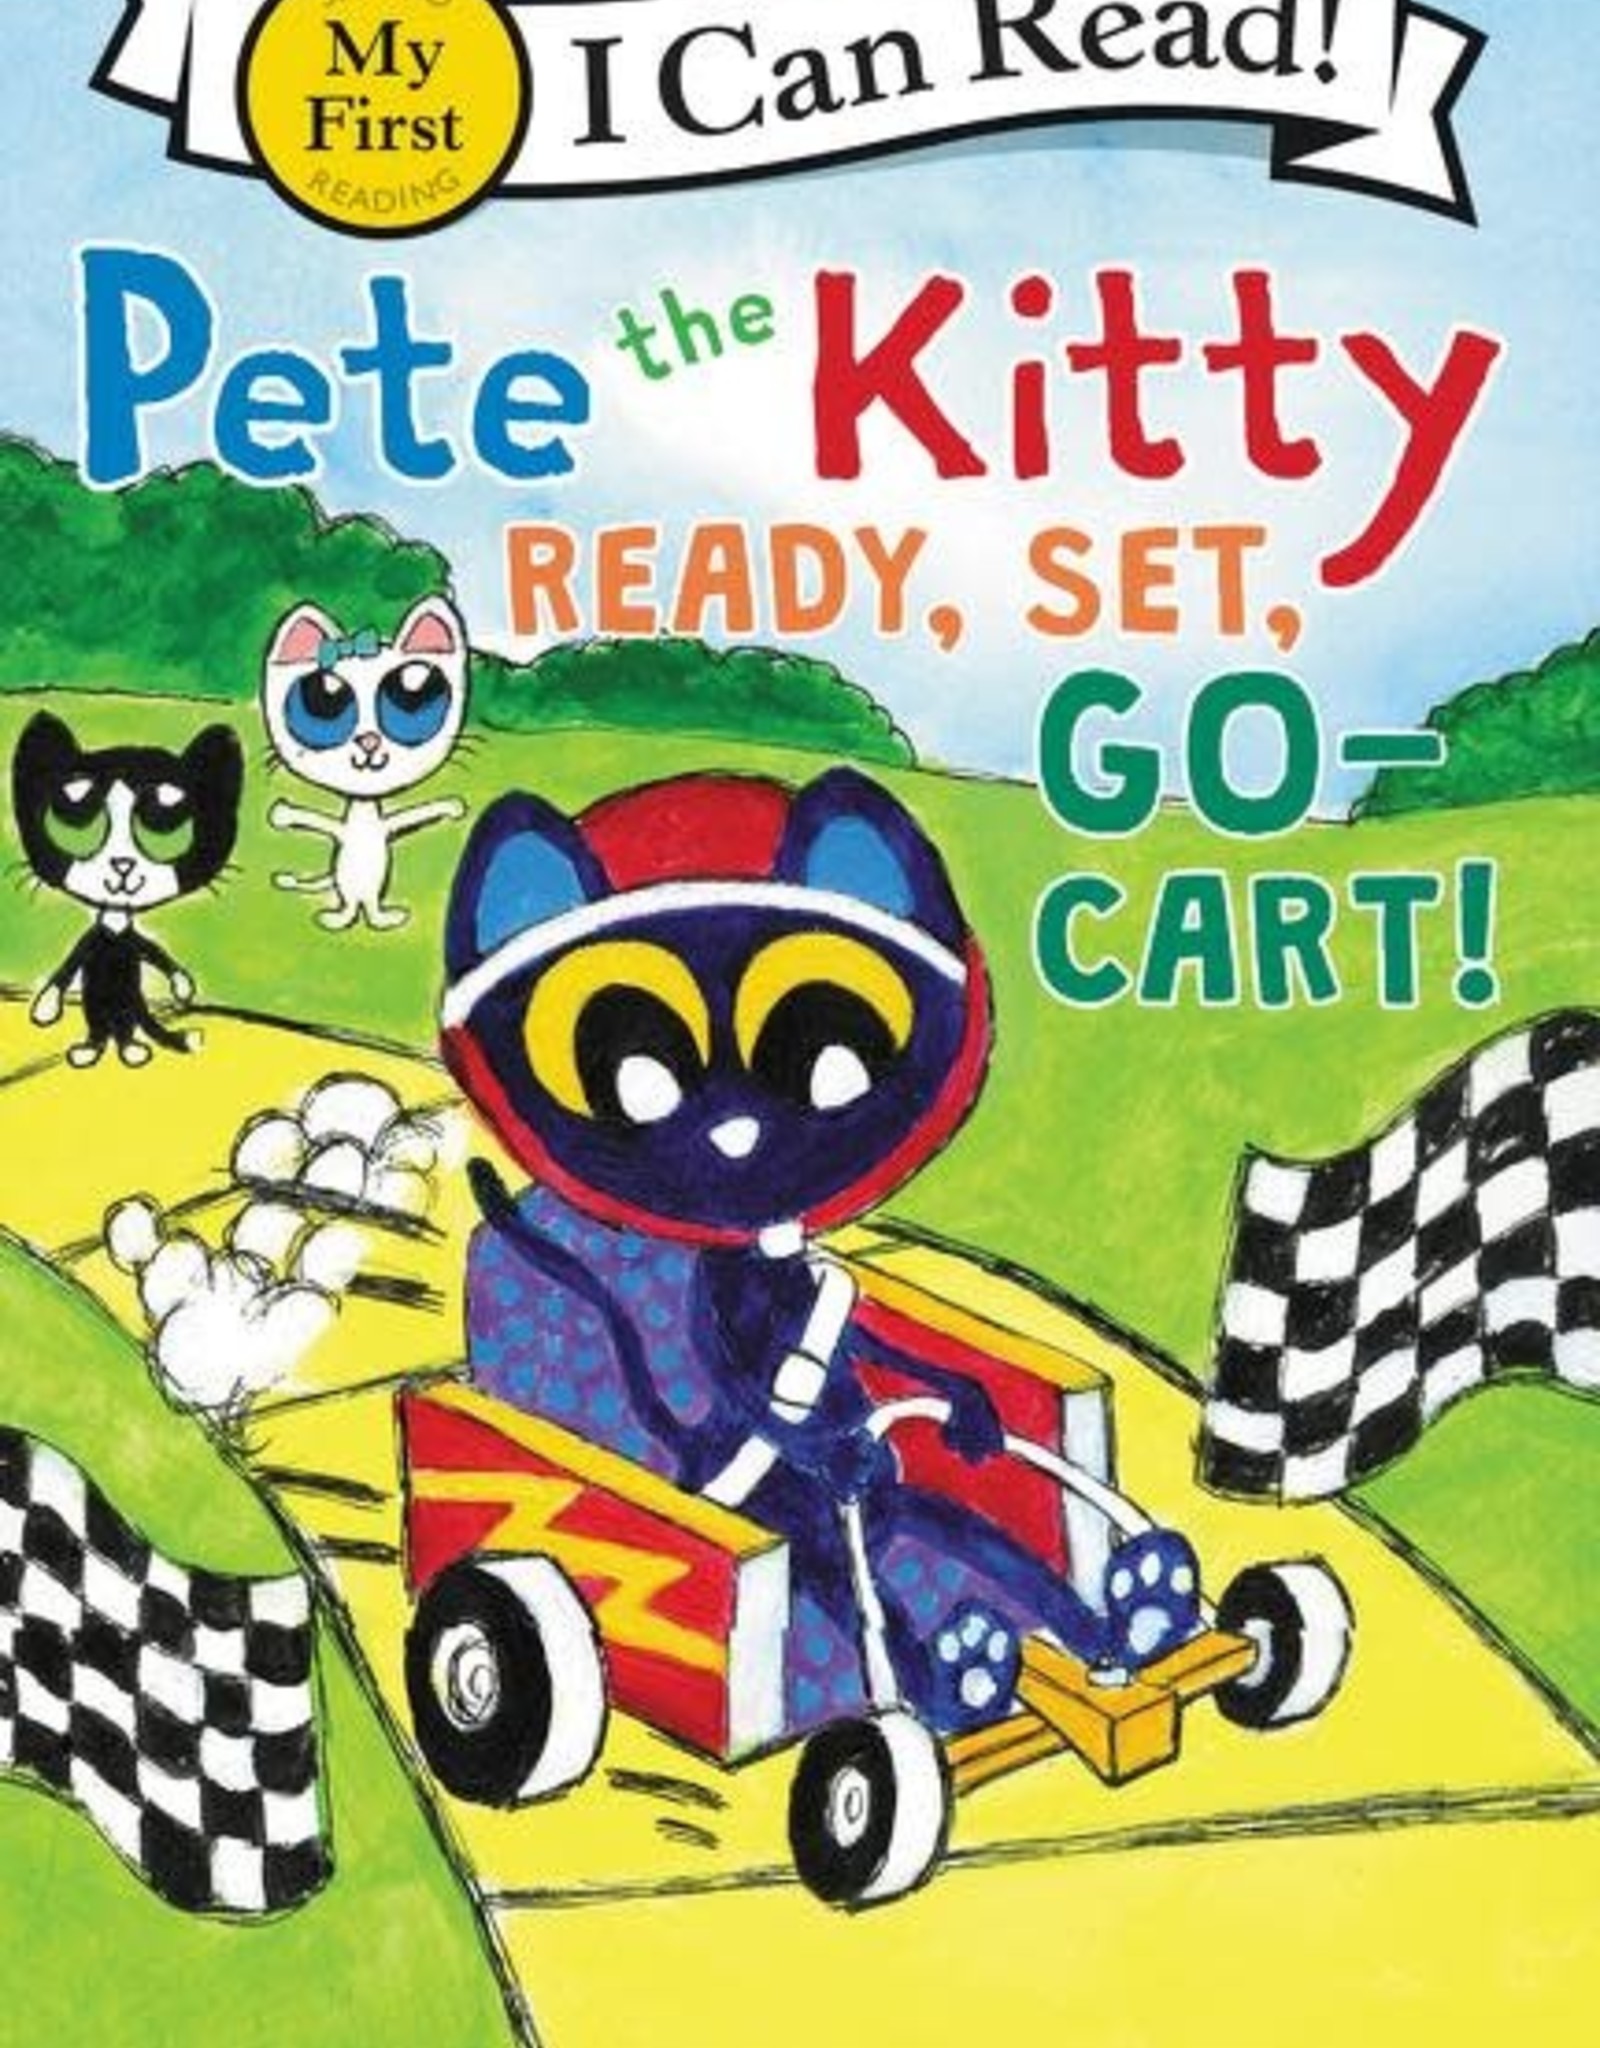 I Can Read! Pete the Kitty Ready Set Go Cart